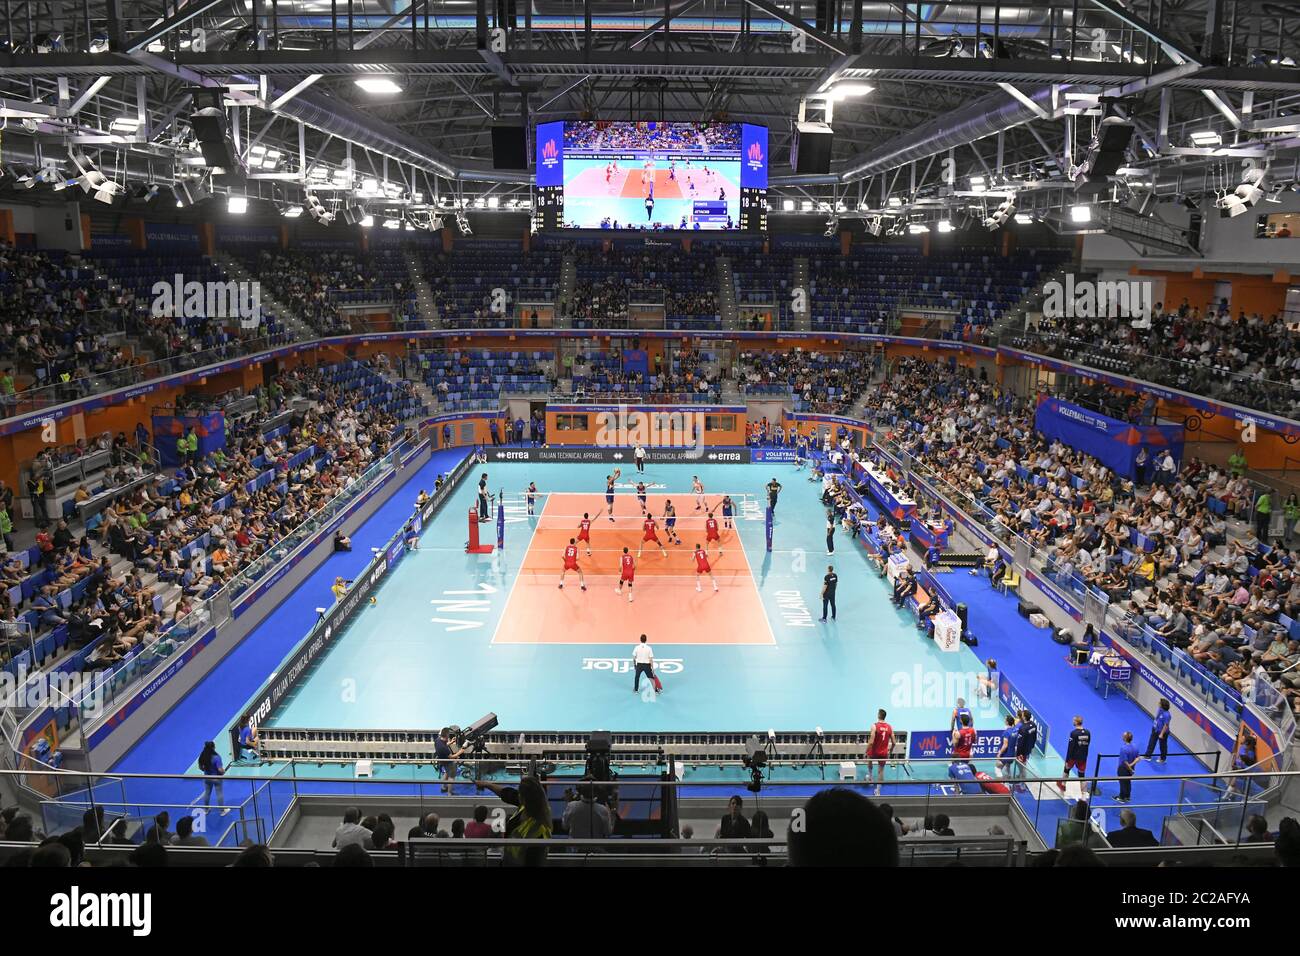 Panoramic top view of the indoor volleyball court, Allianz Cloud, during the international Volley Nations League match, Italy vs Serbia, in Milan. Stock Photo